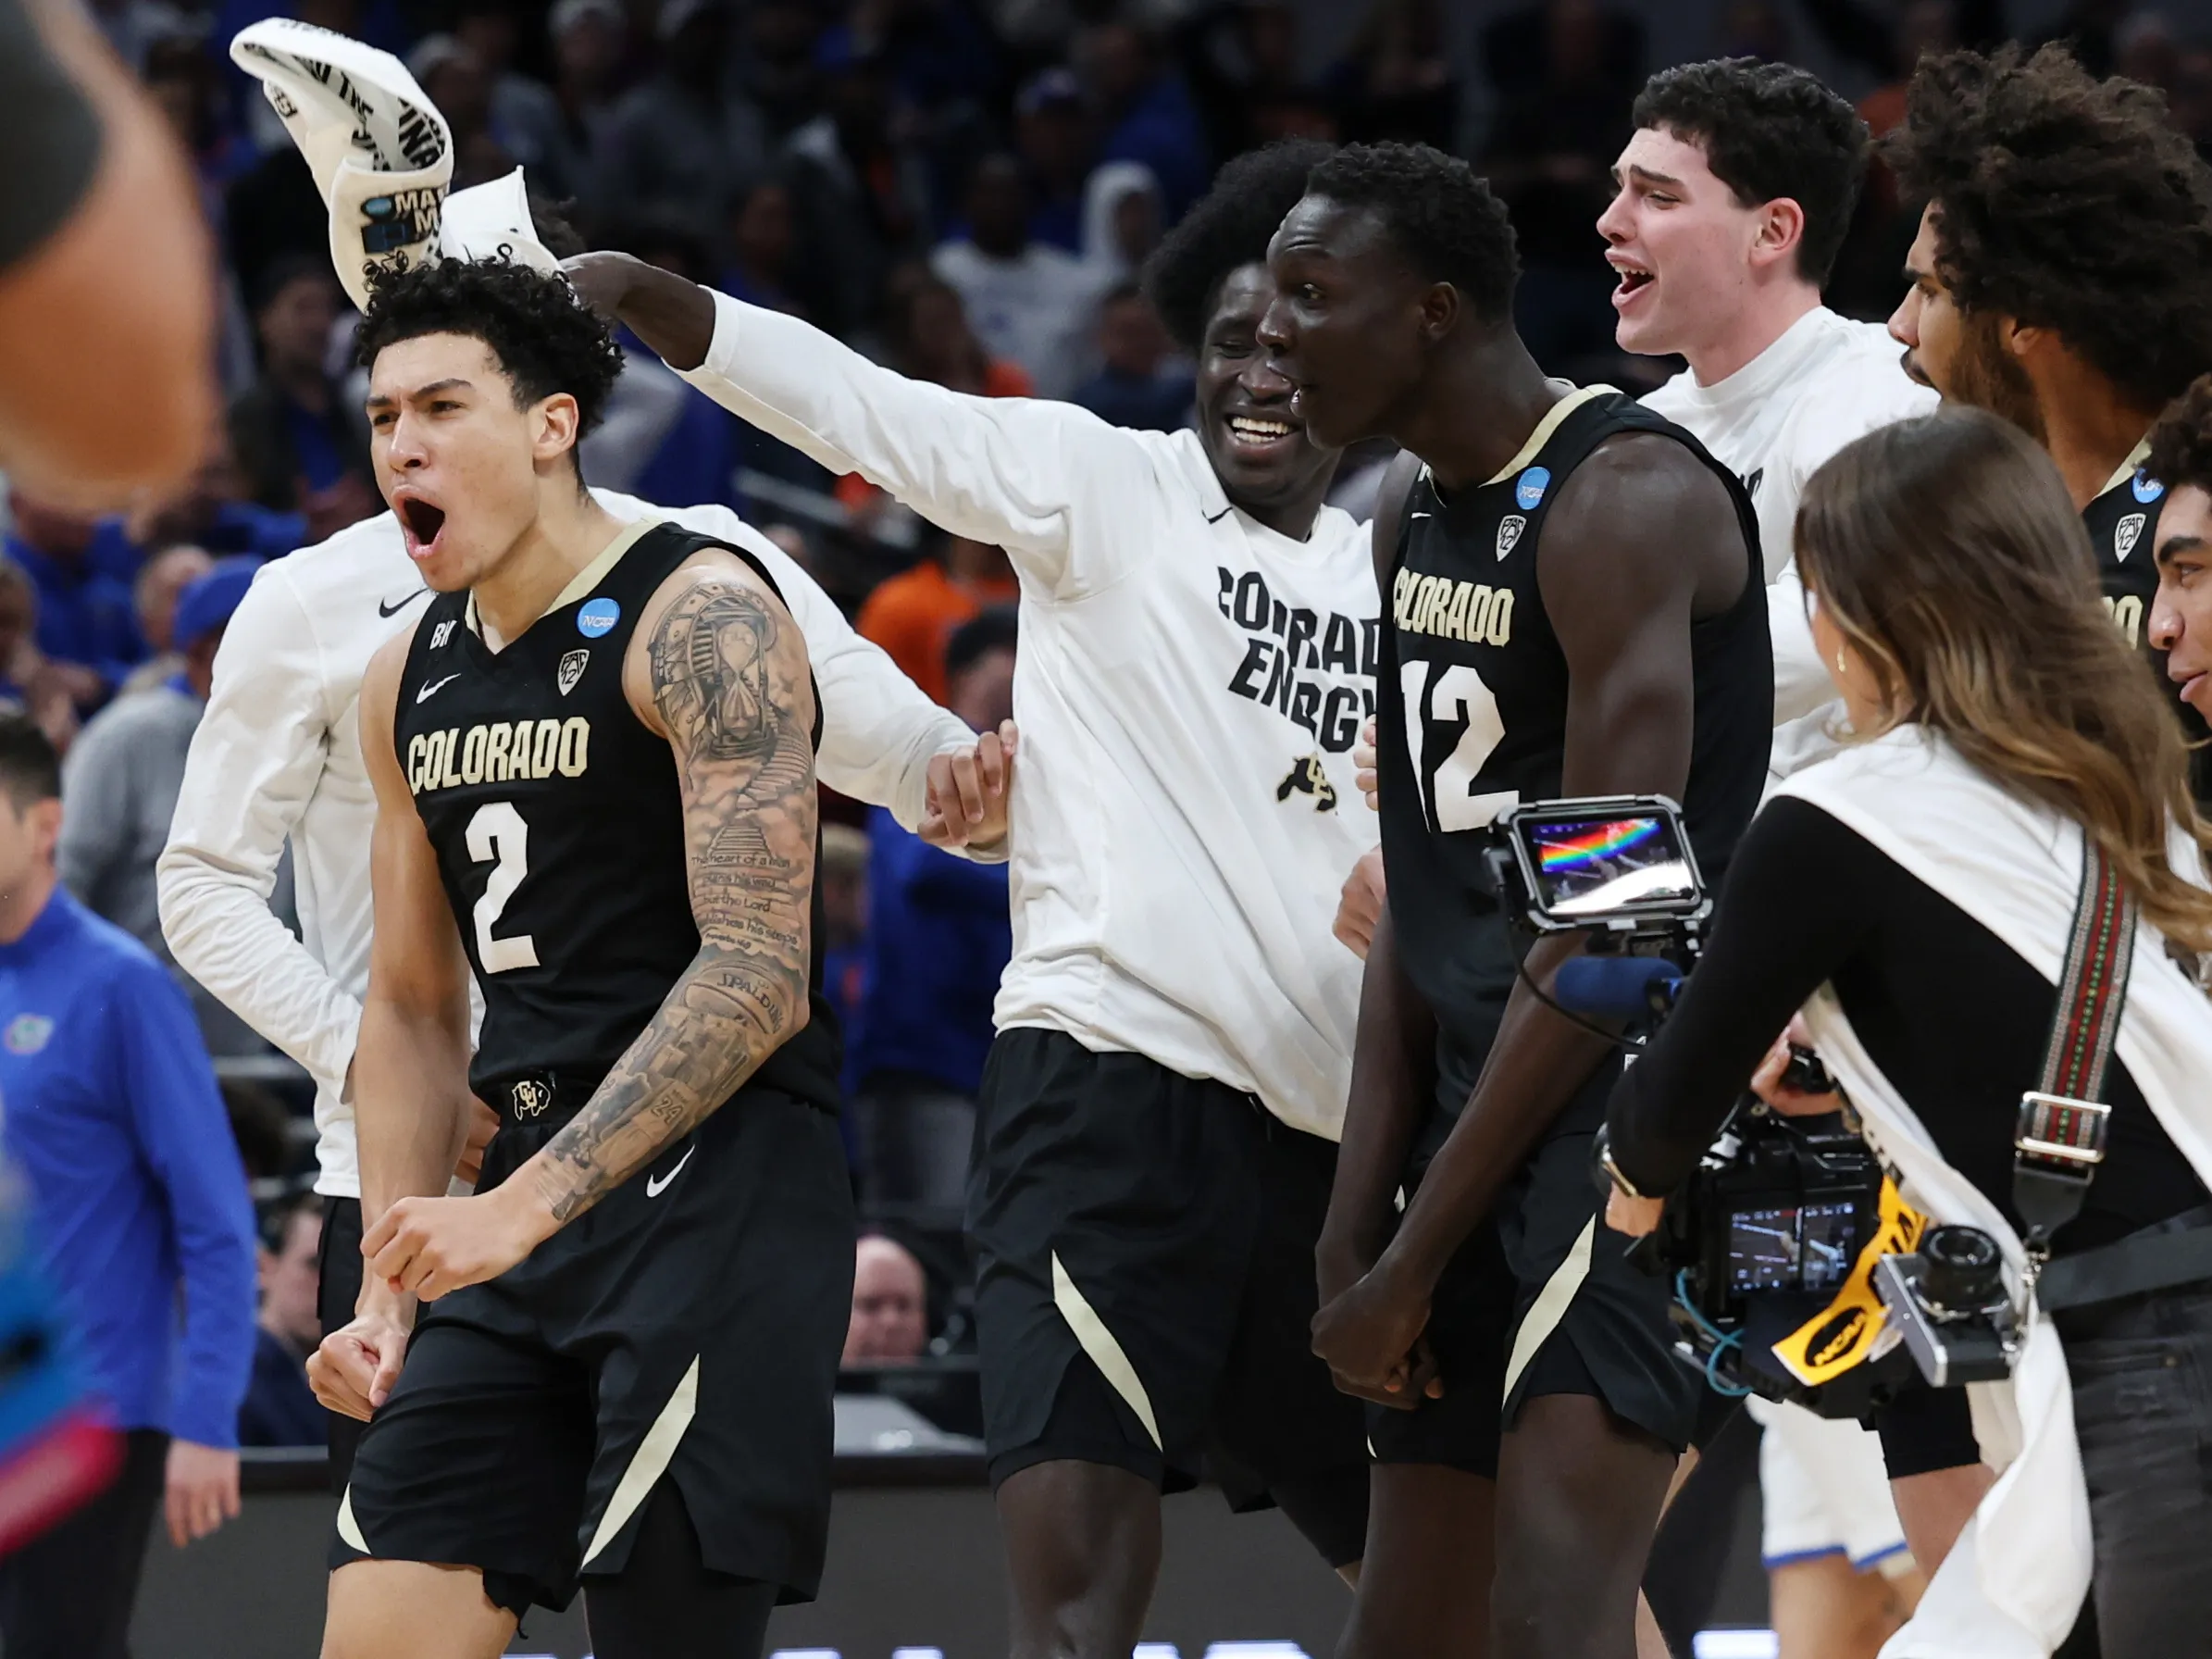 Grand Canyon's March Madness Upset: Underdog Victory Makes History